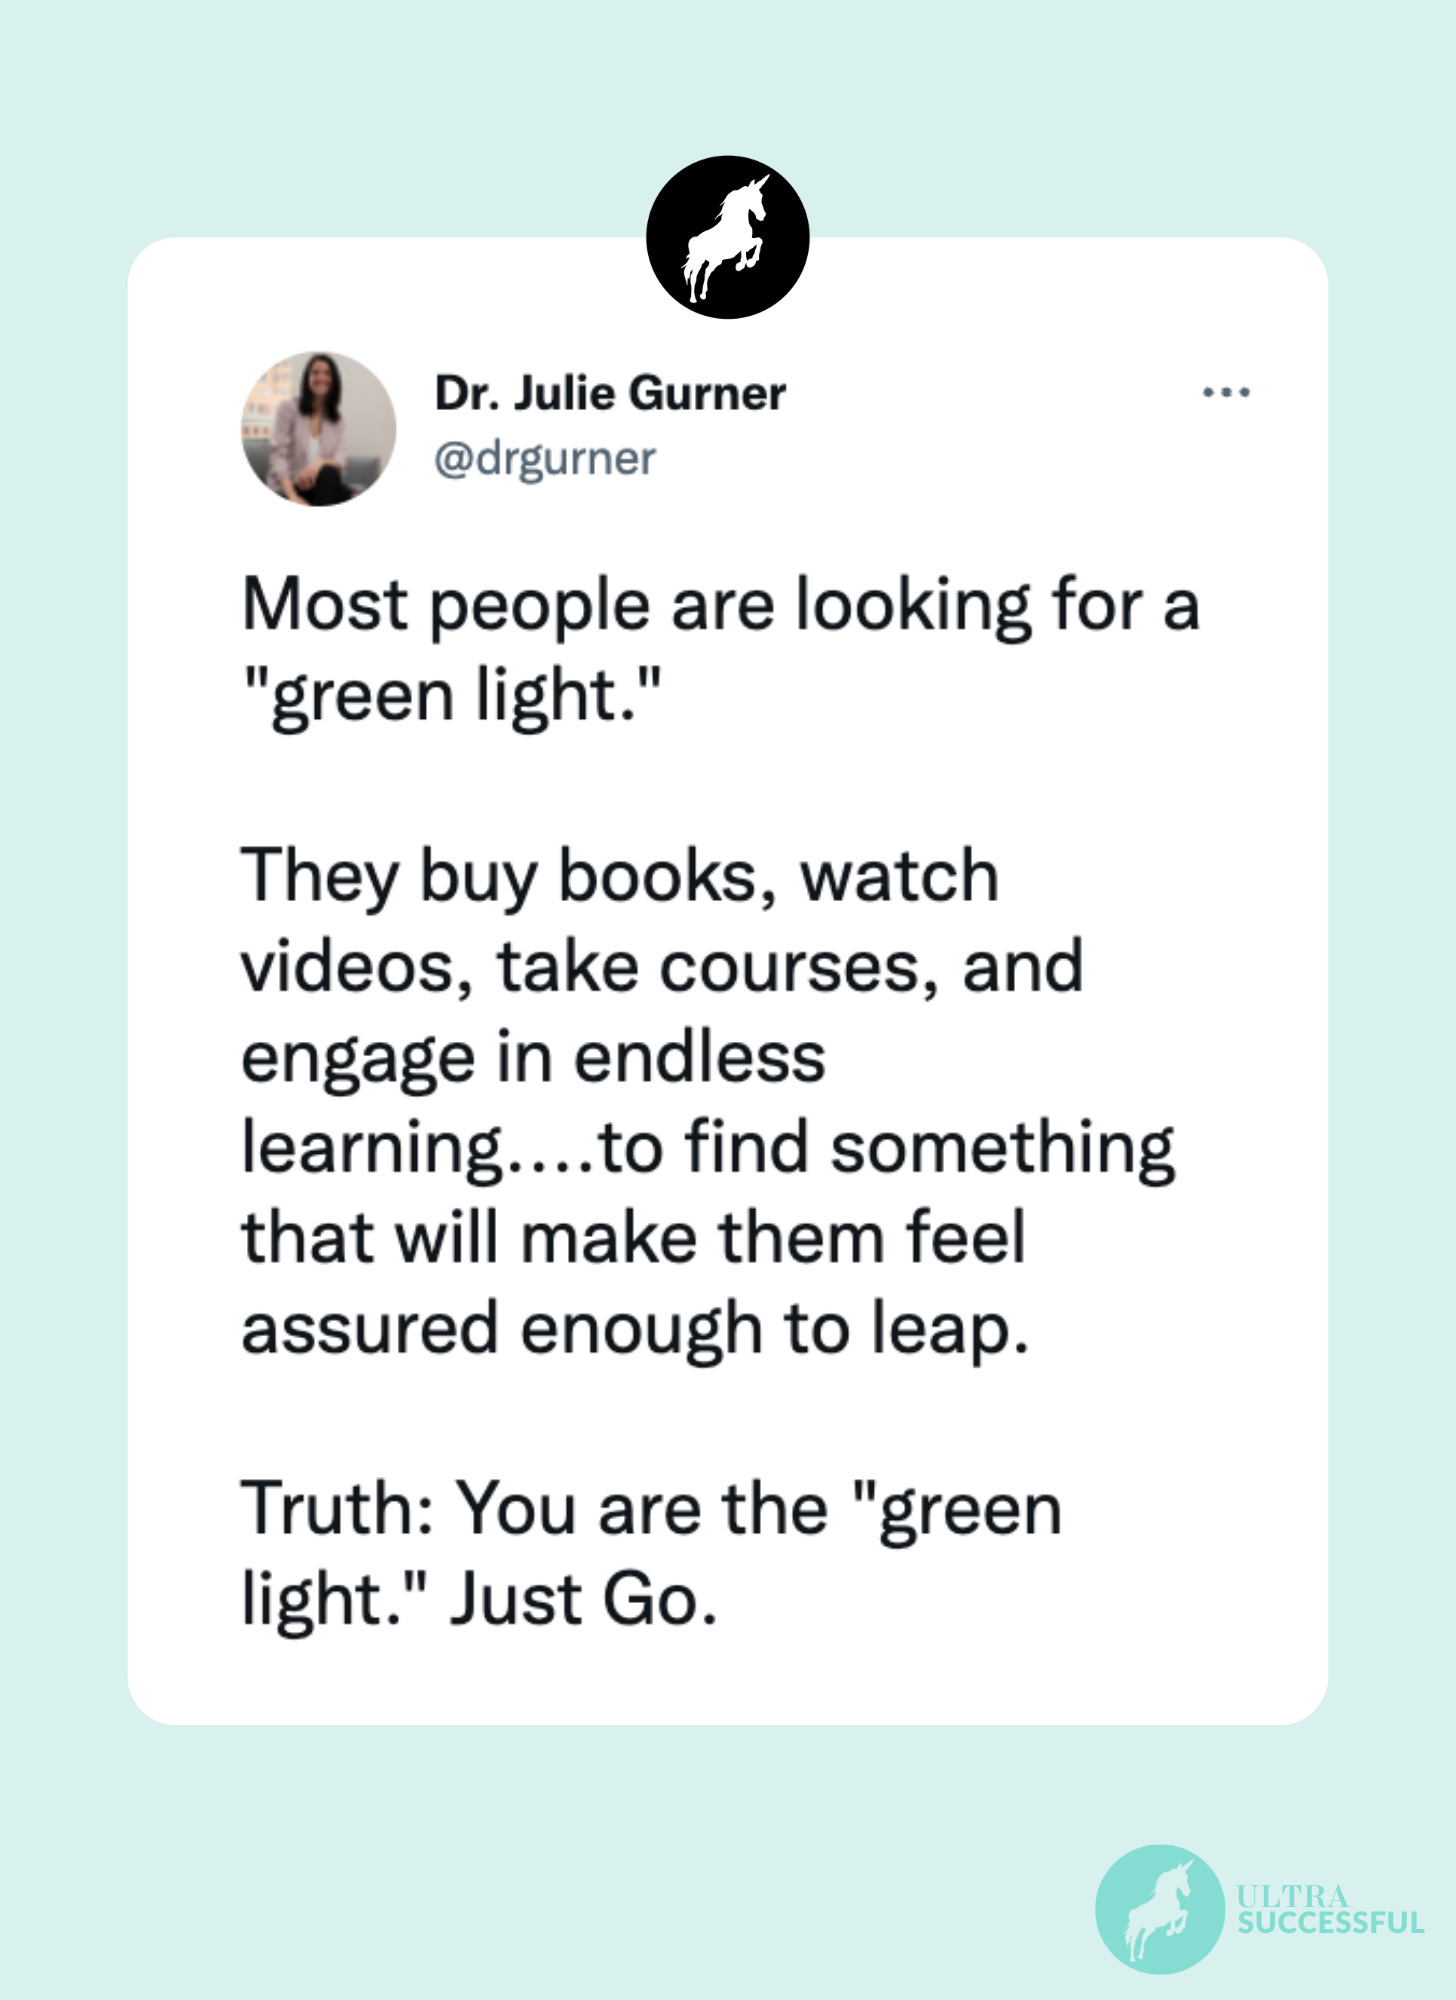 @drgurner: Most people are looking for a "green light."  They buy books, watch videos, take courses, and engage in endless learning....to find something that will make them feel assured enough to leap.  Truth: You are the "green light." Just Go.